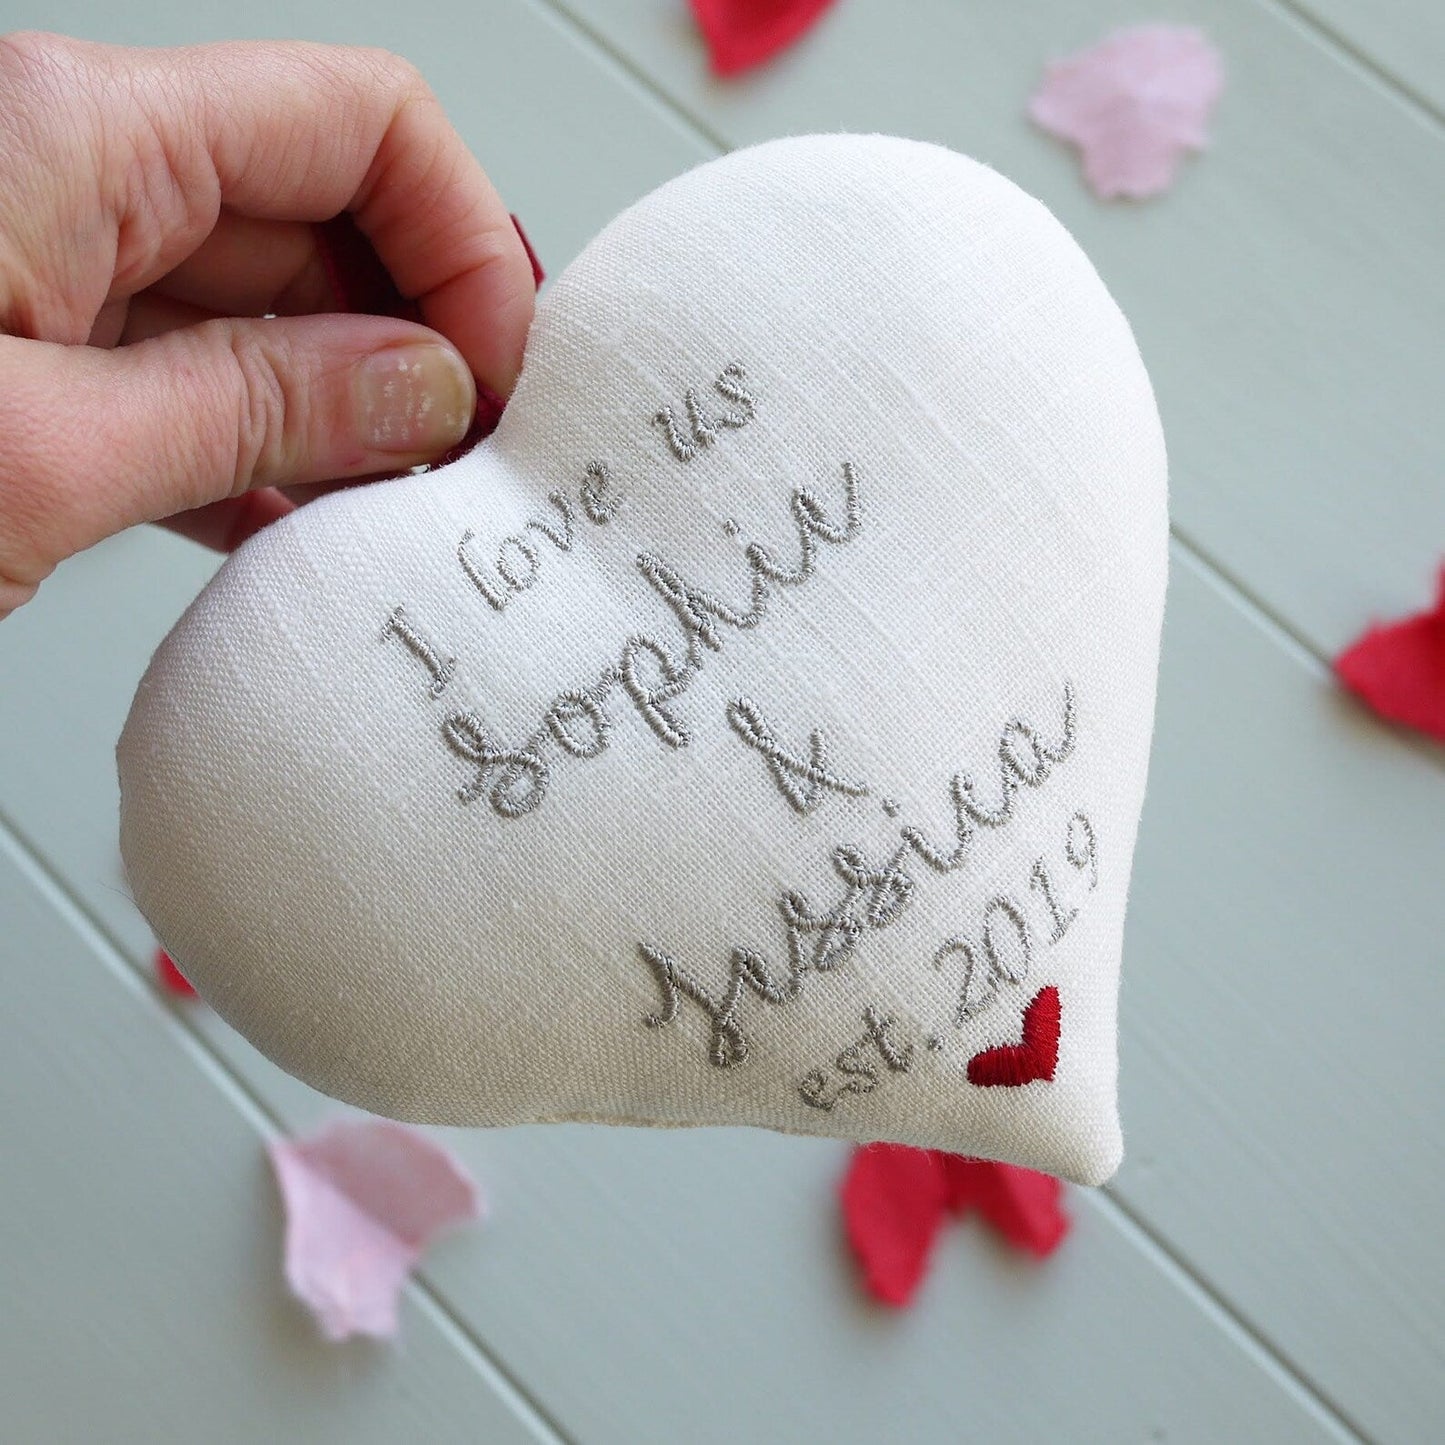 Valentines Day ’I Love Us’ Gift Heart with Love Letter Personalised Valentine’s Day Gifts